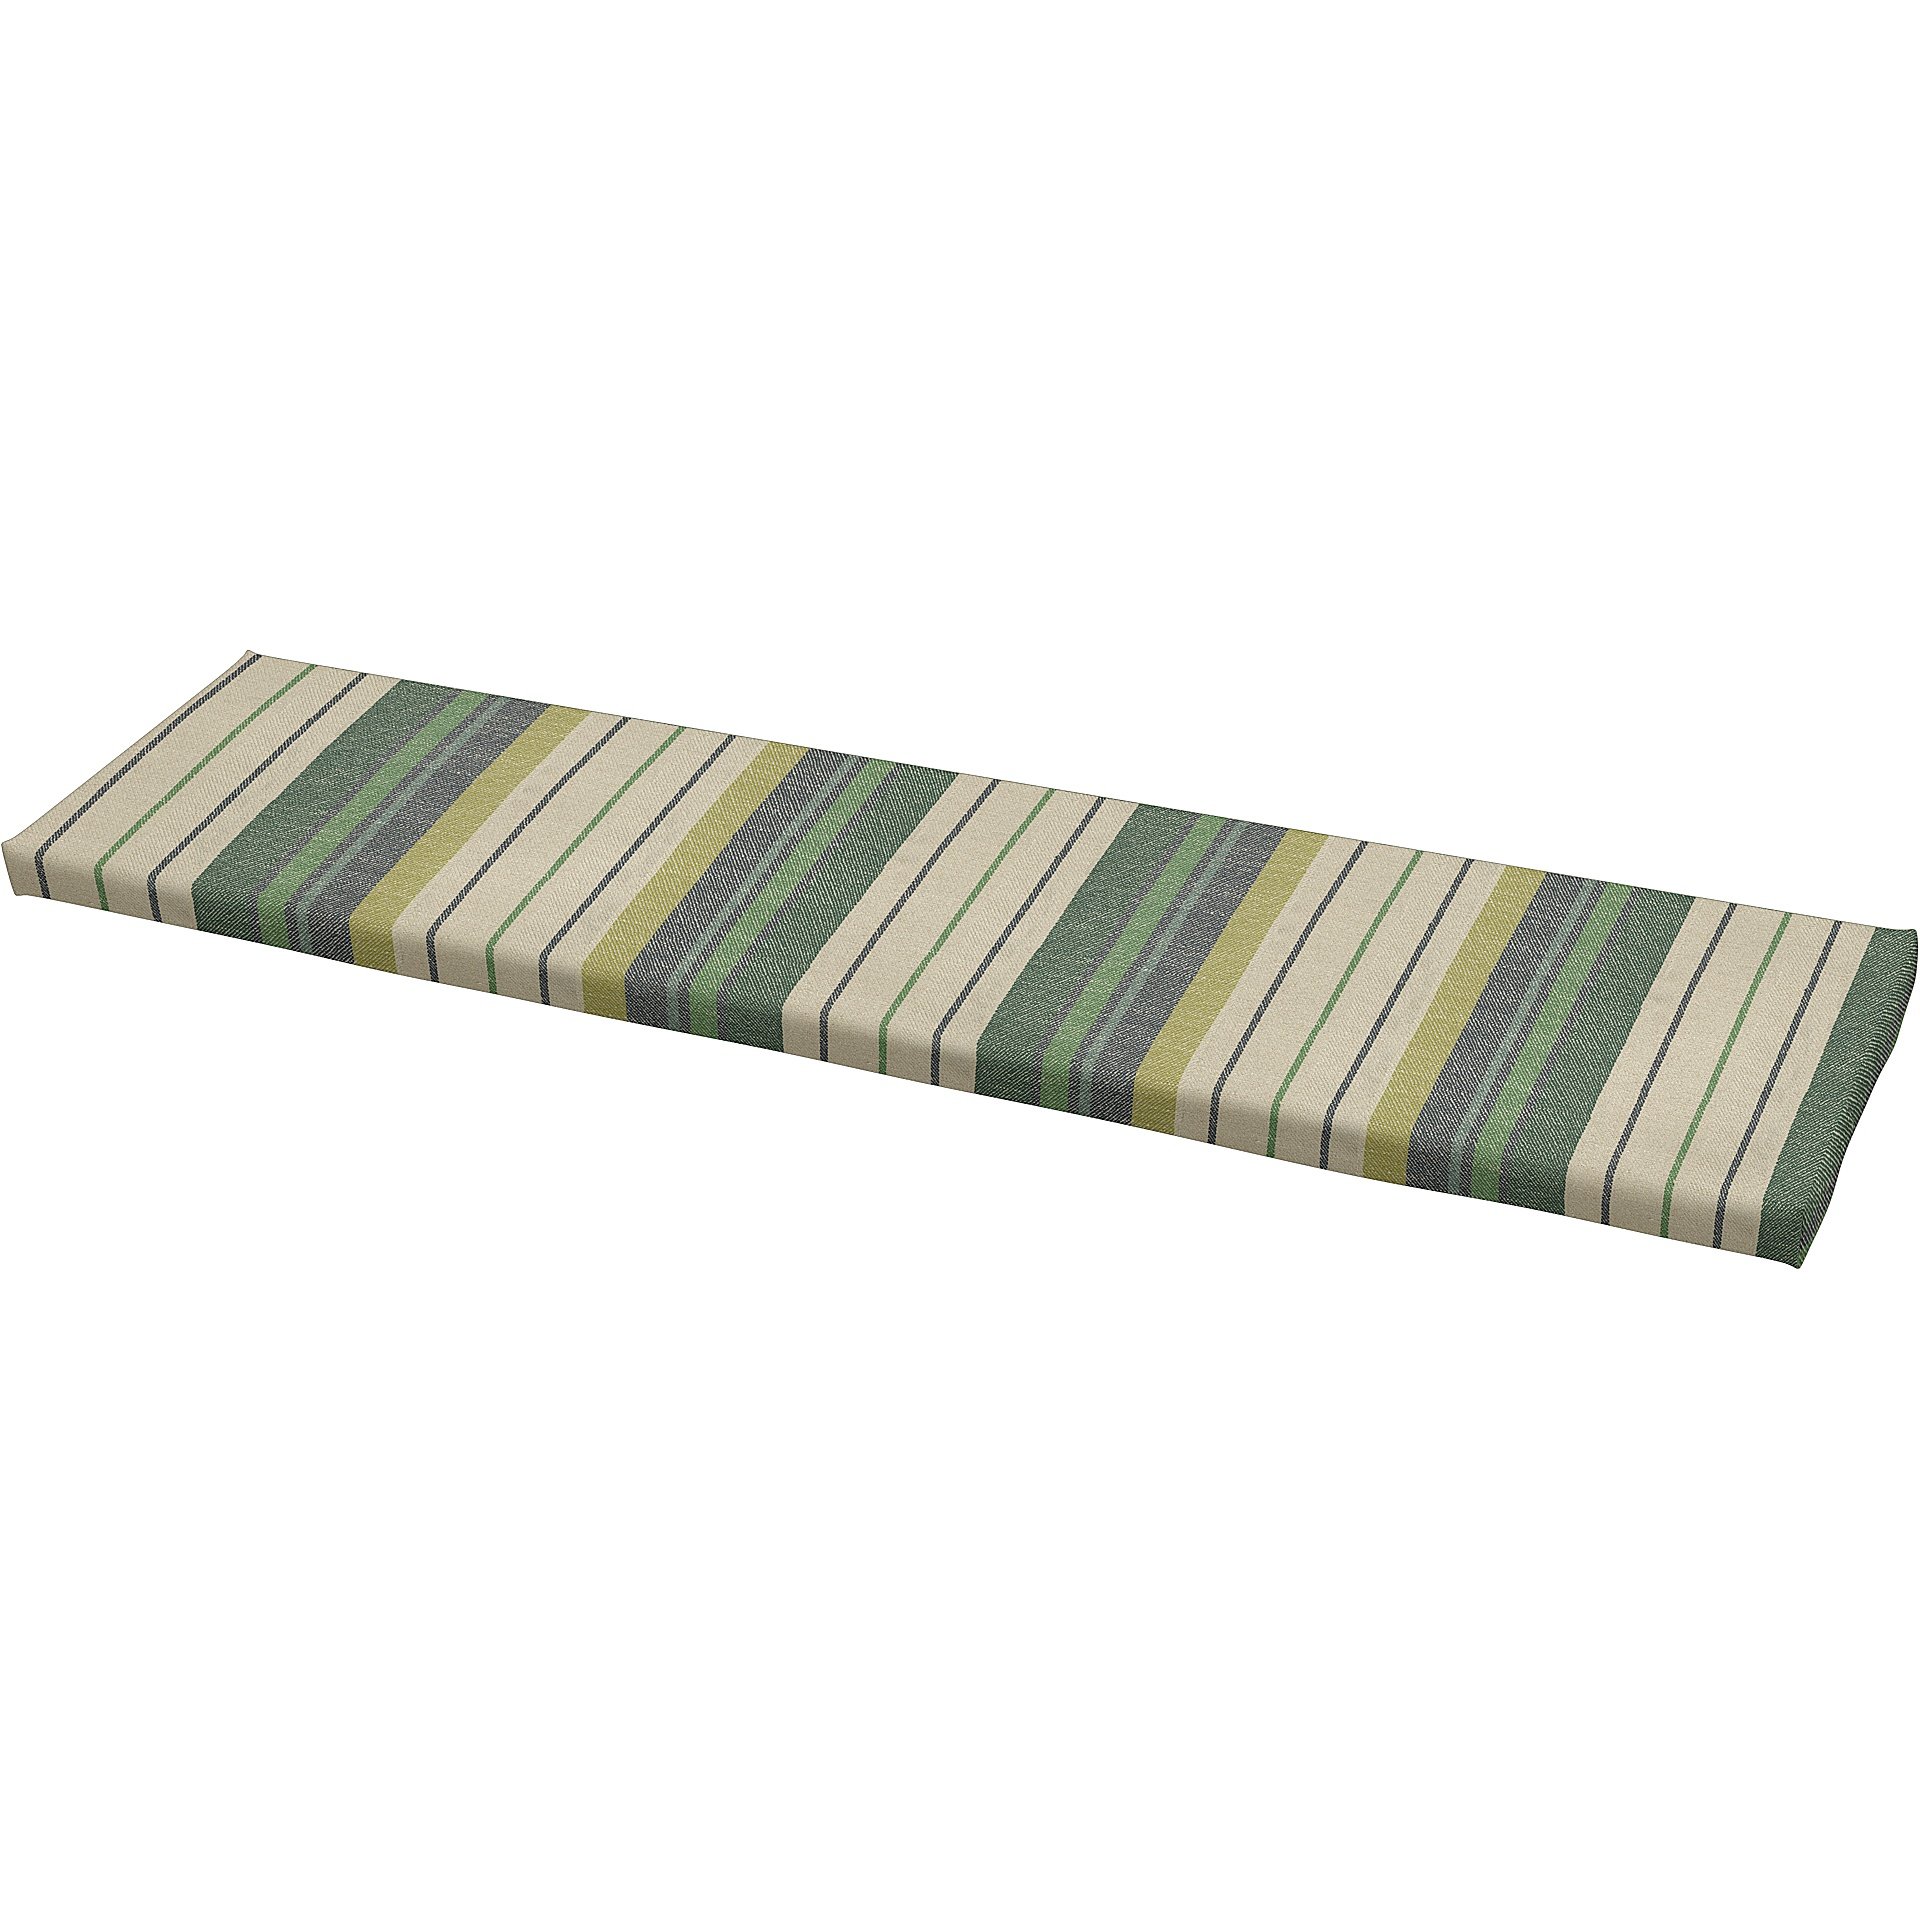 IKEA - Universal bench cushion cover 140x35x3,5 cm, Forest Glade, Cotton - Bemz